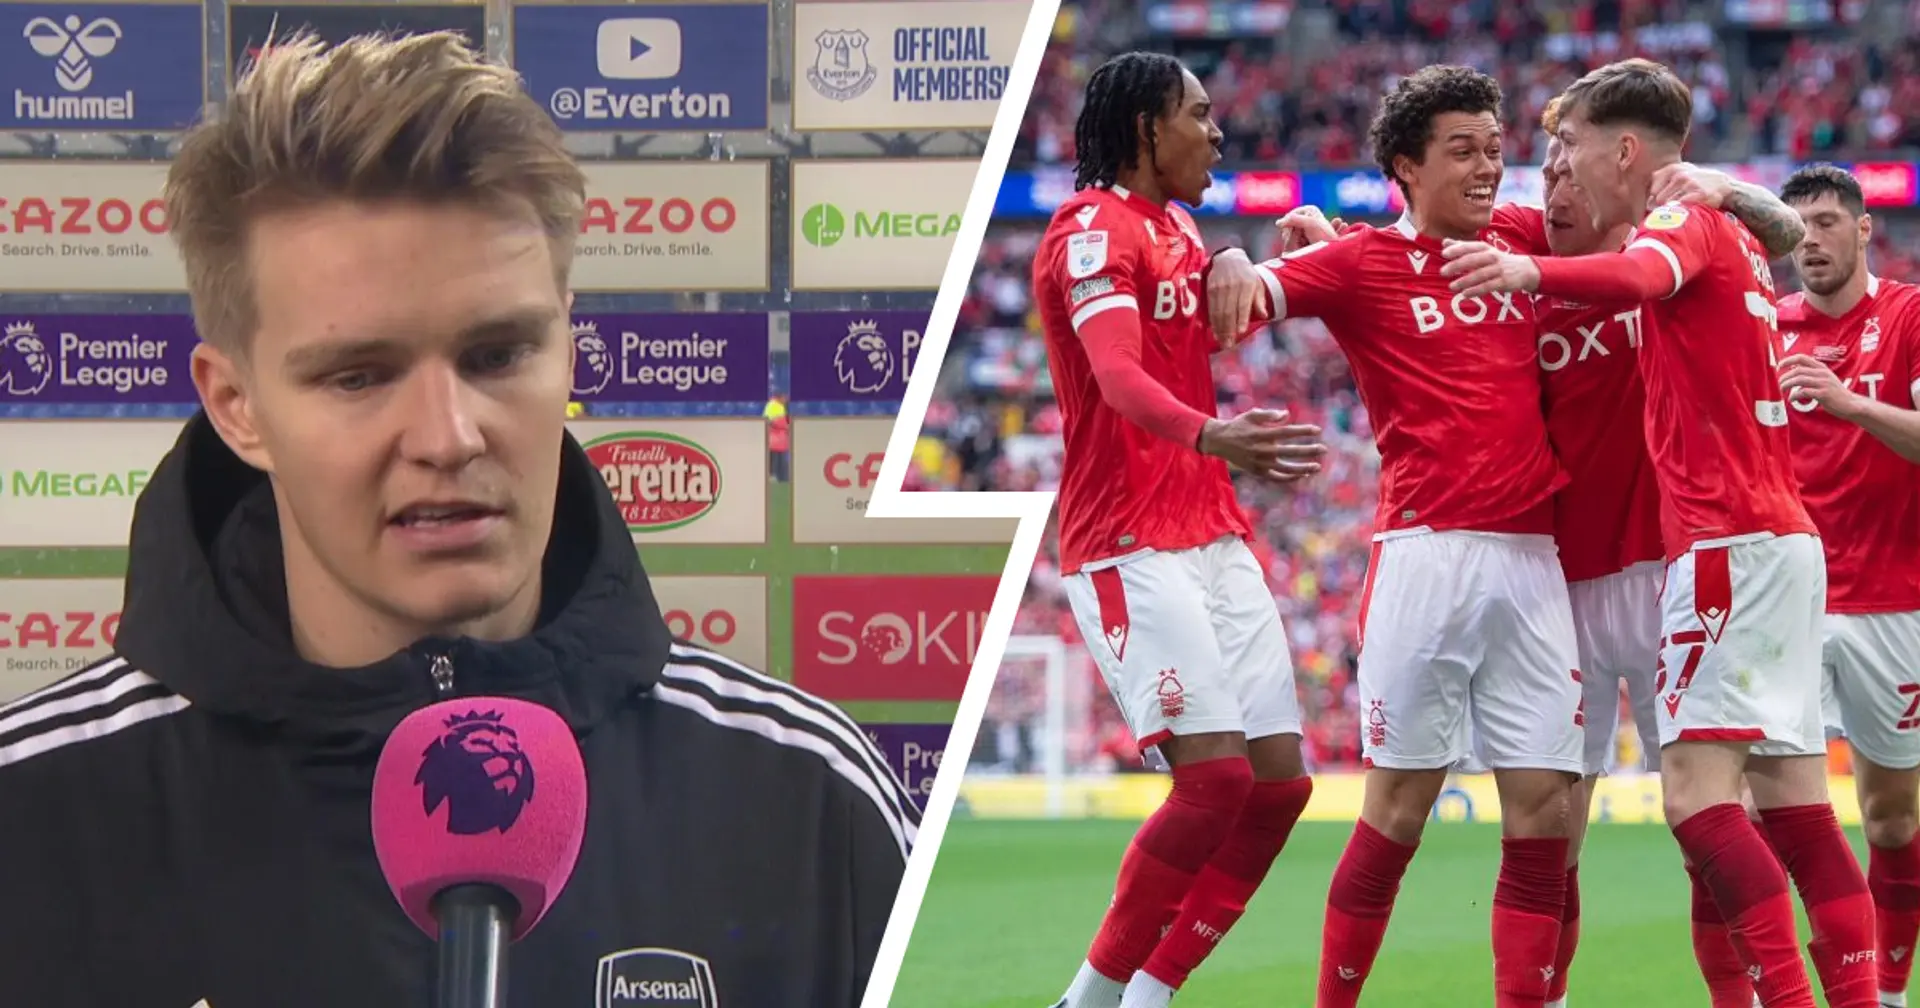 'They have shown they can beat anybody': Odegaard refuses to take Nottingham Forest lightly